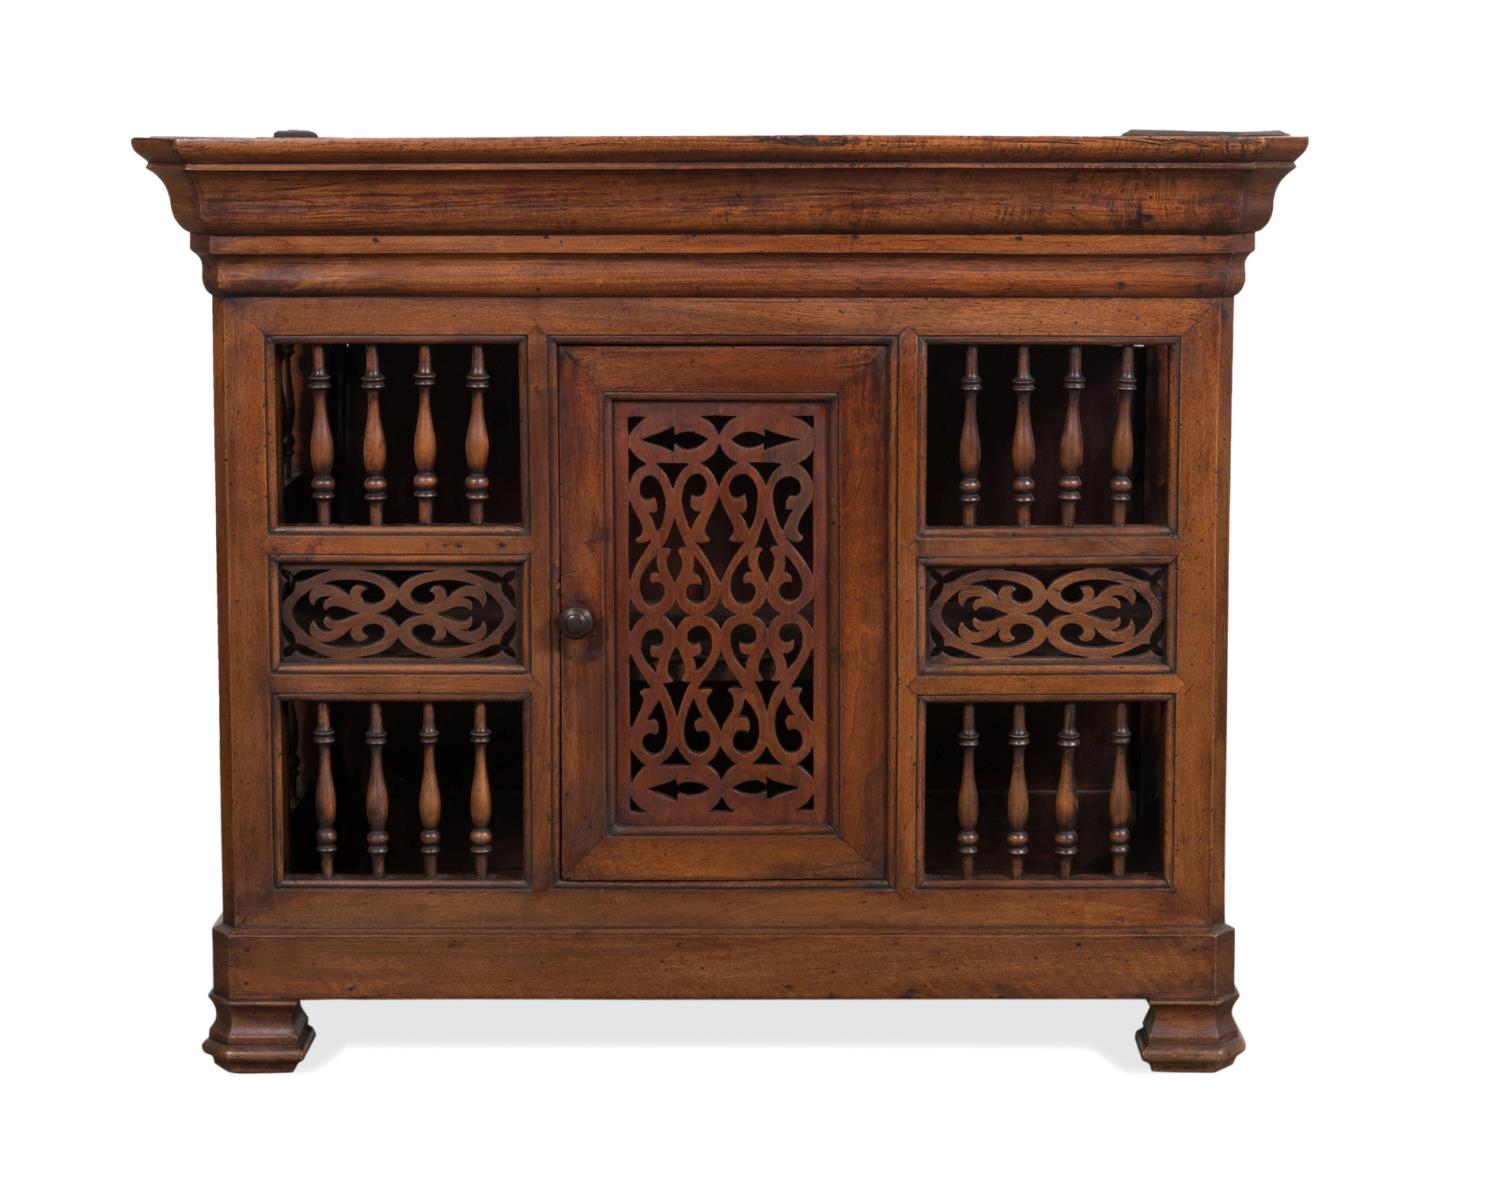 FRENCH LOUIS PHILIPPE STYLE WALNUT